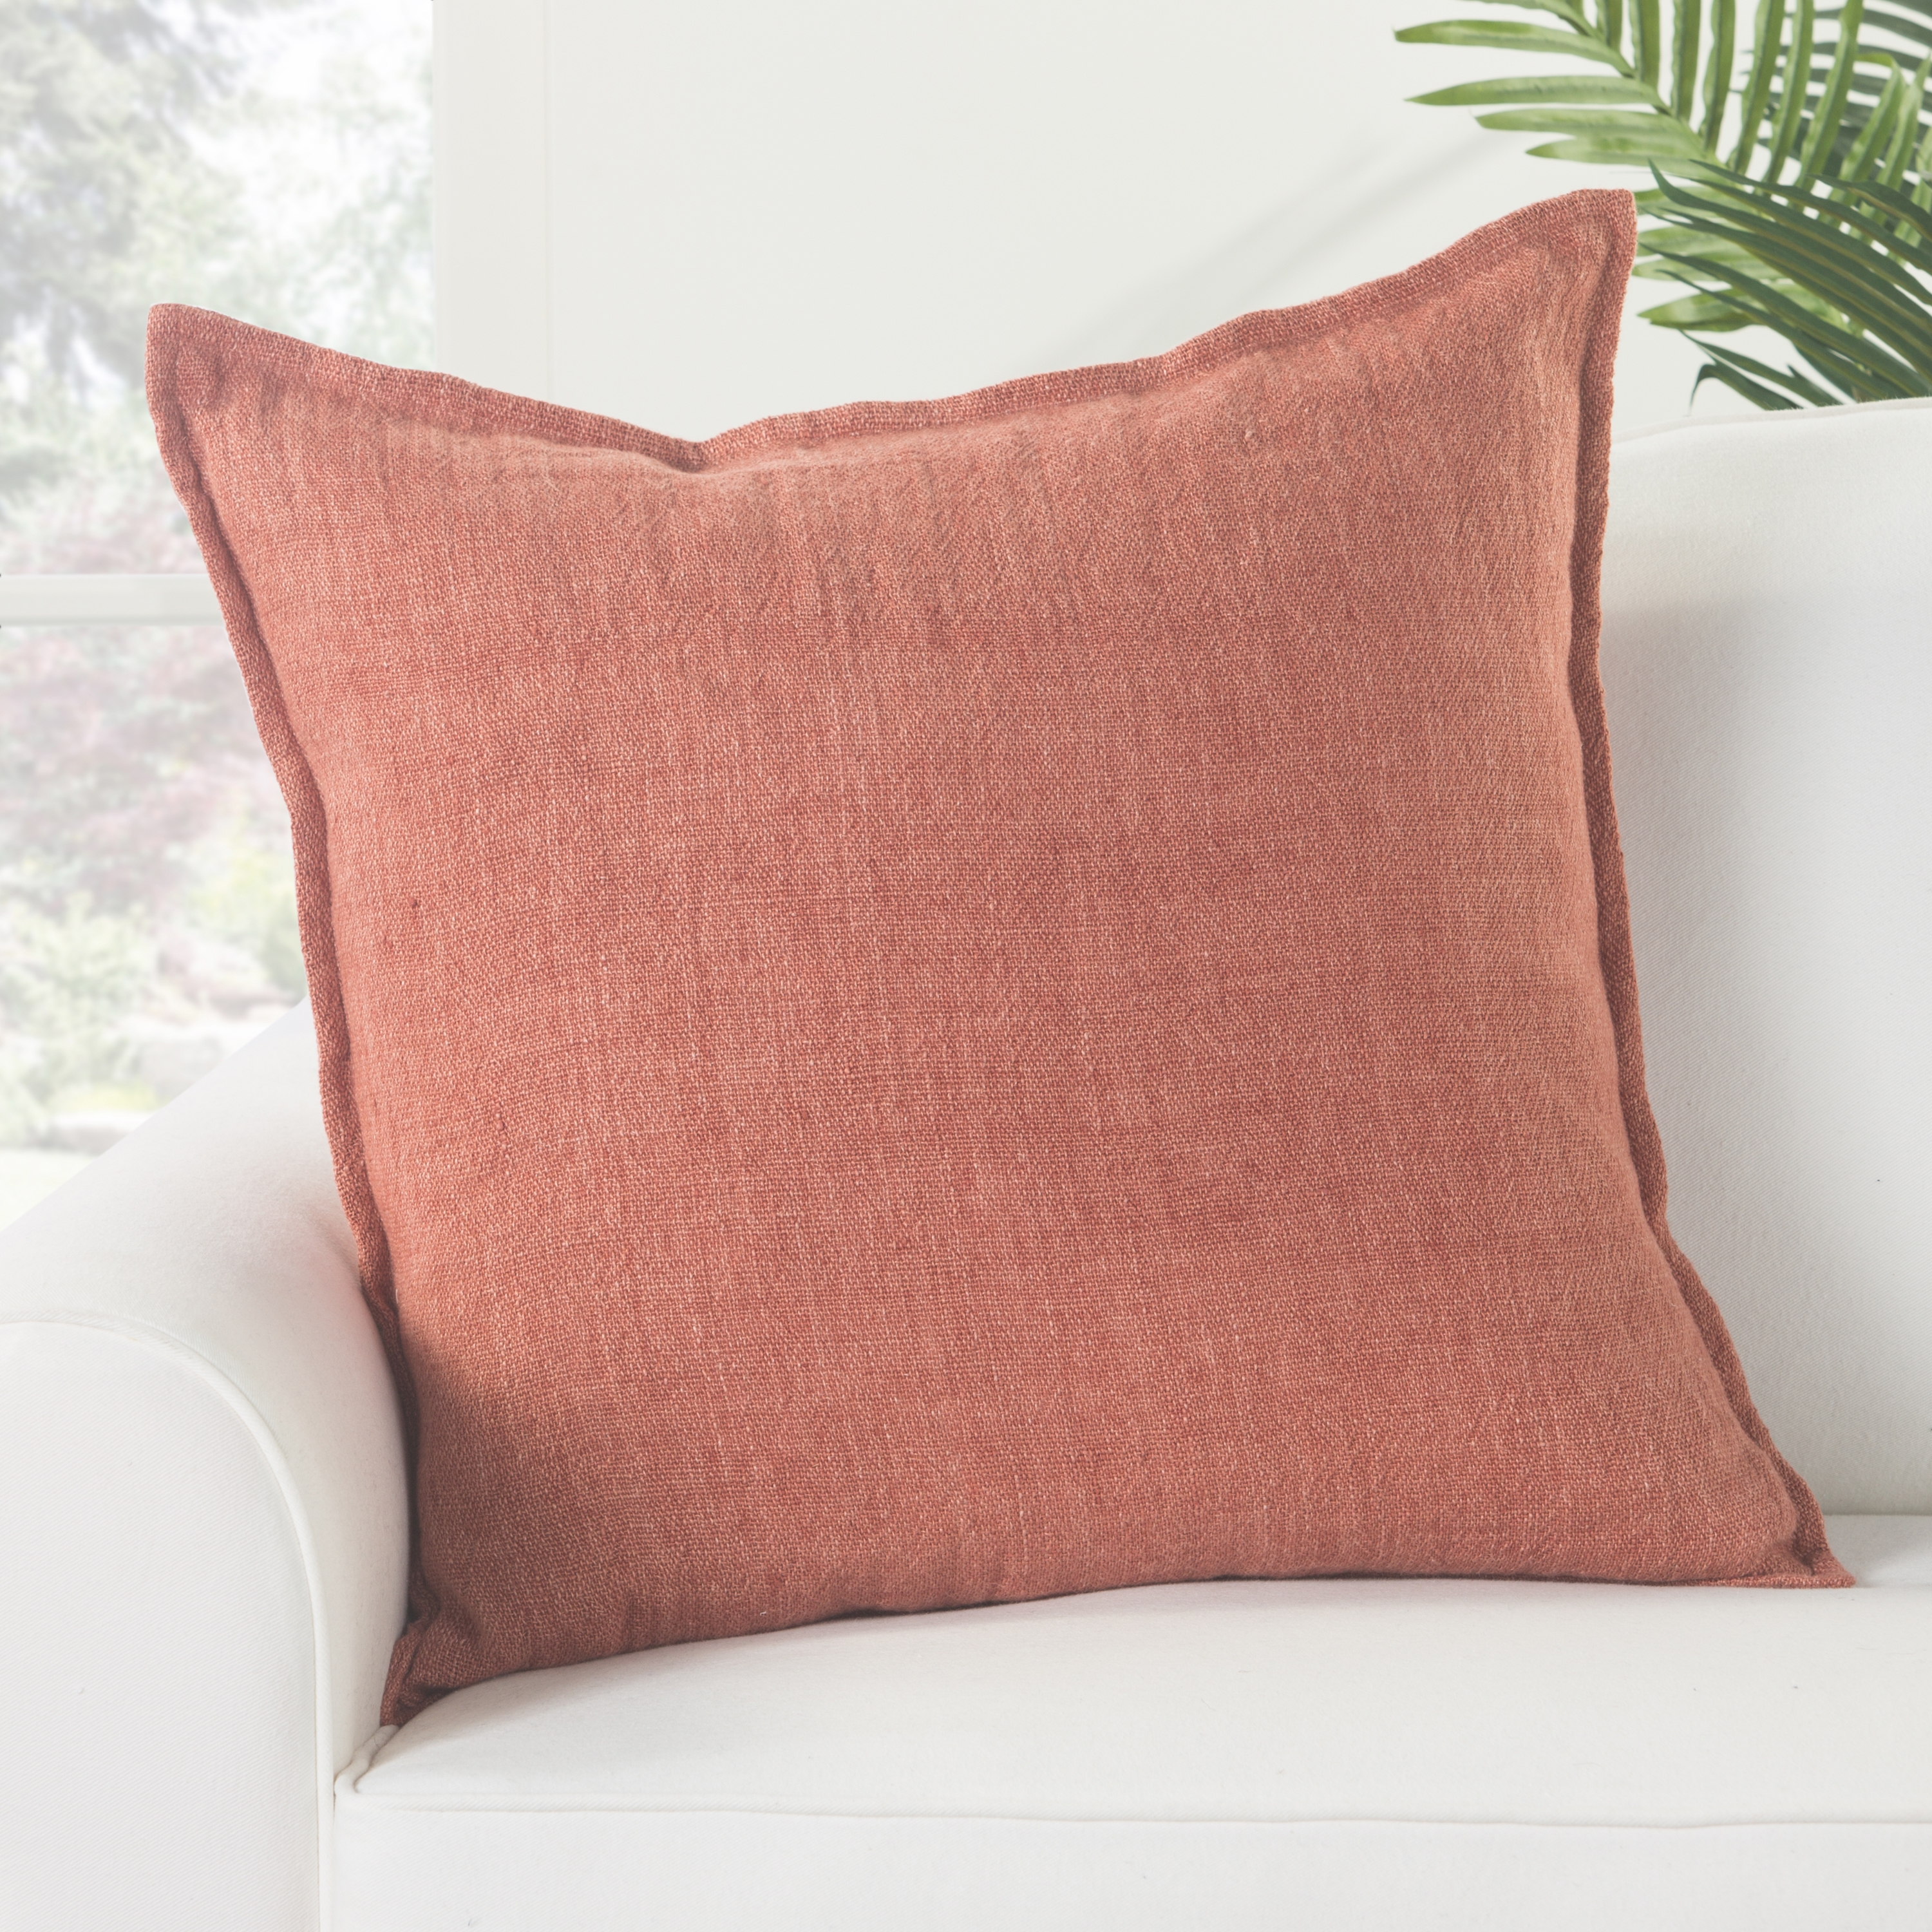 Design (US) Red 22"X22" Pillow - Image 3